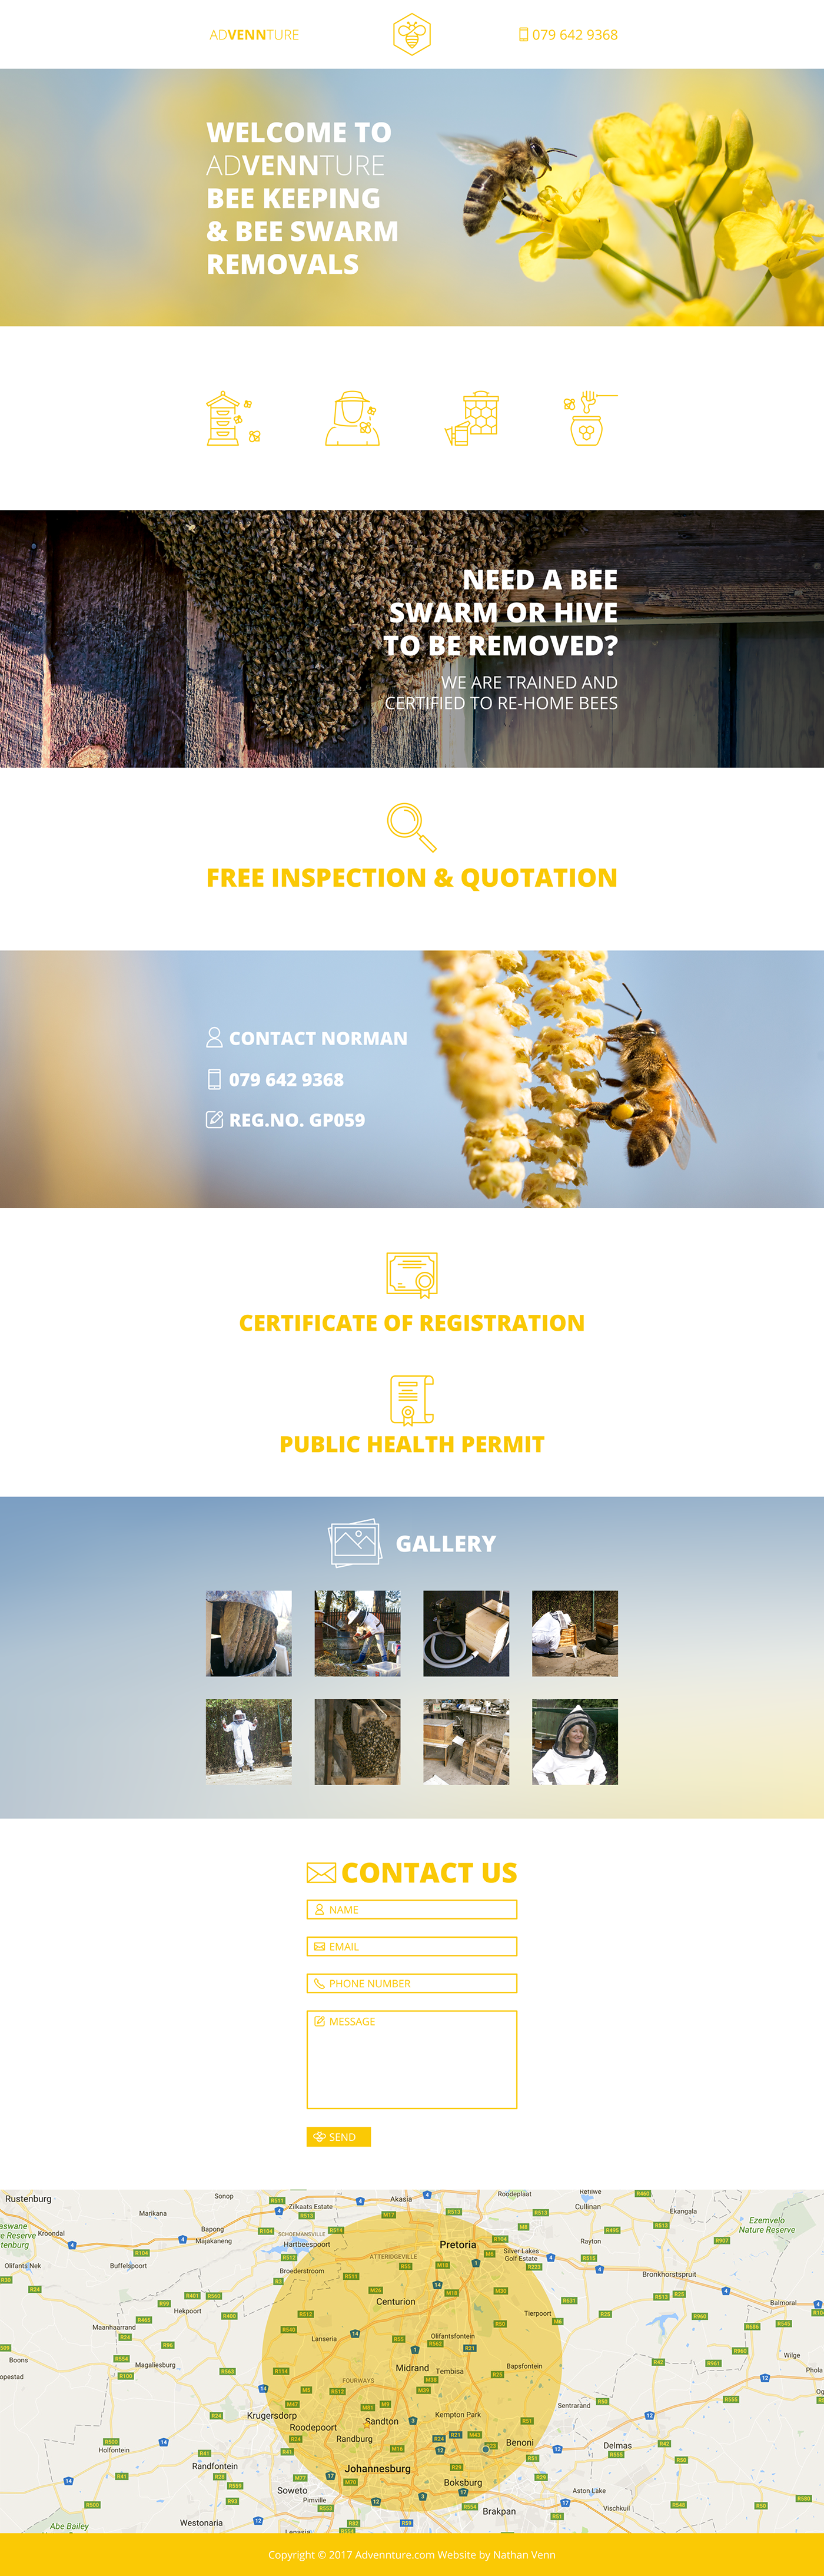 Advennture Micro-site Website uiux bee keeping bees Swarm Removal yellow icons line